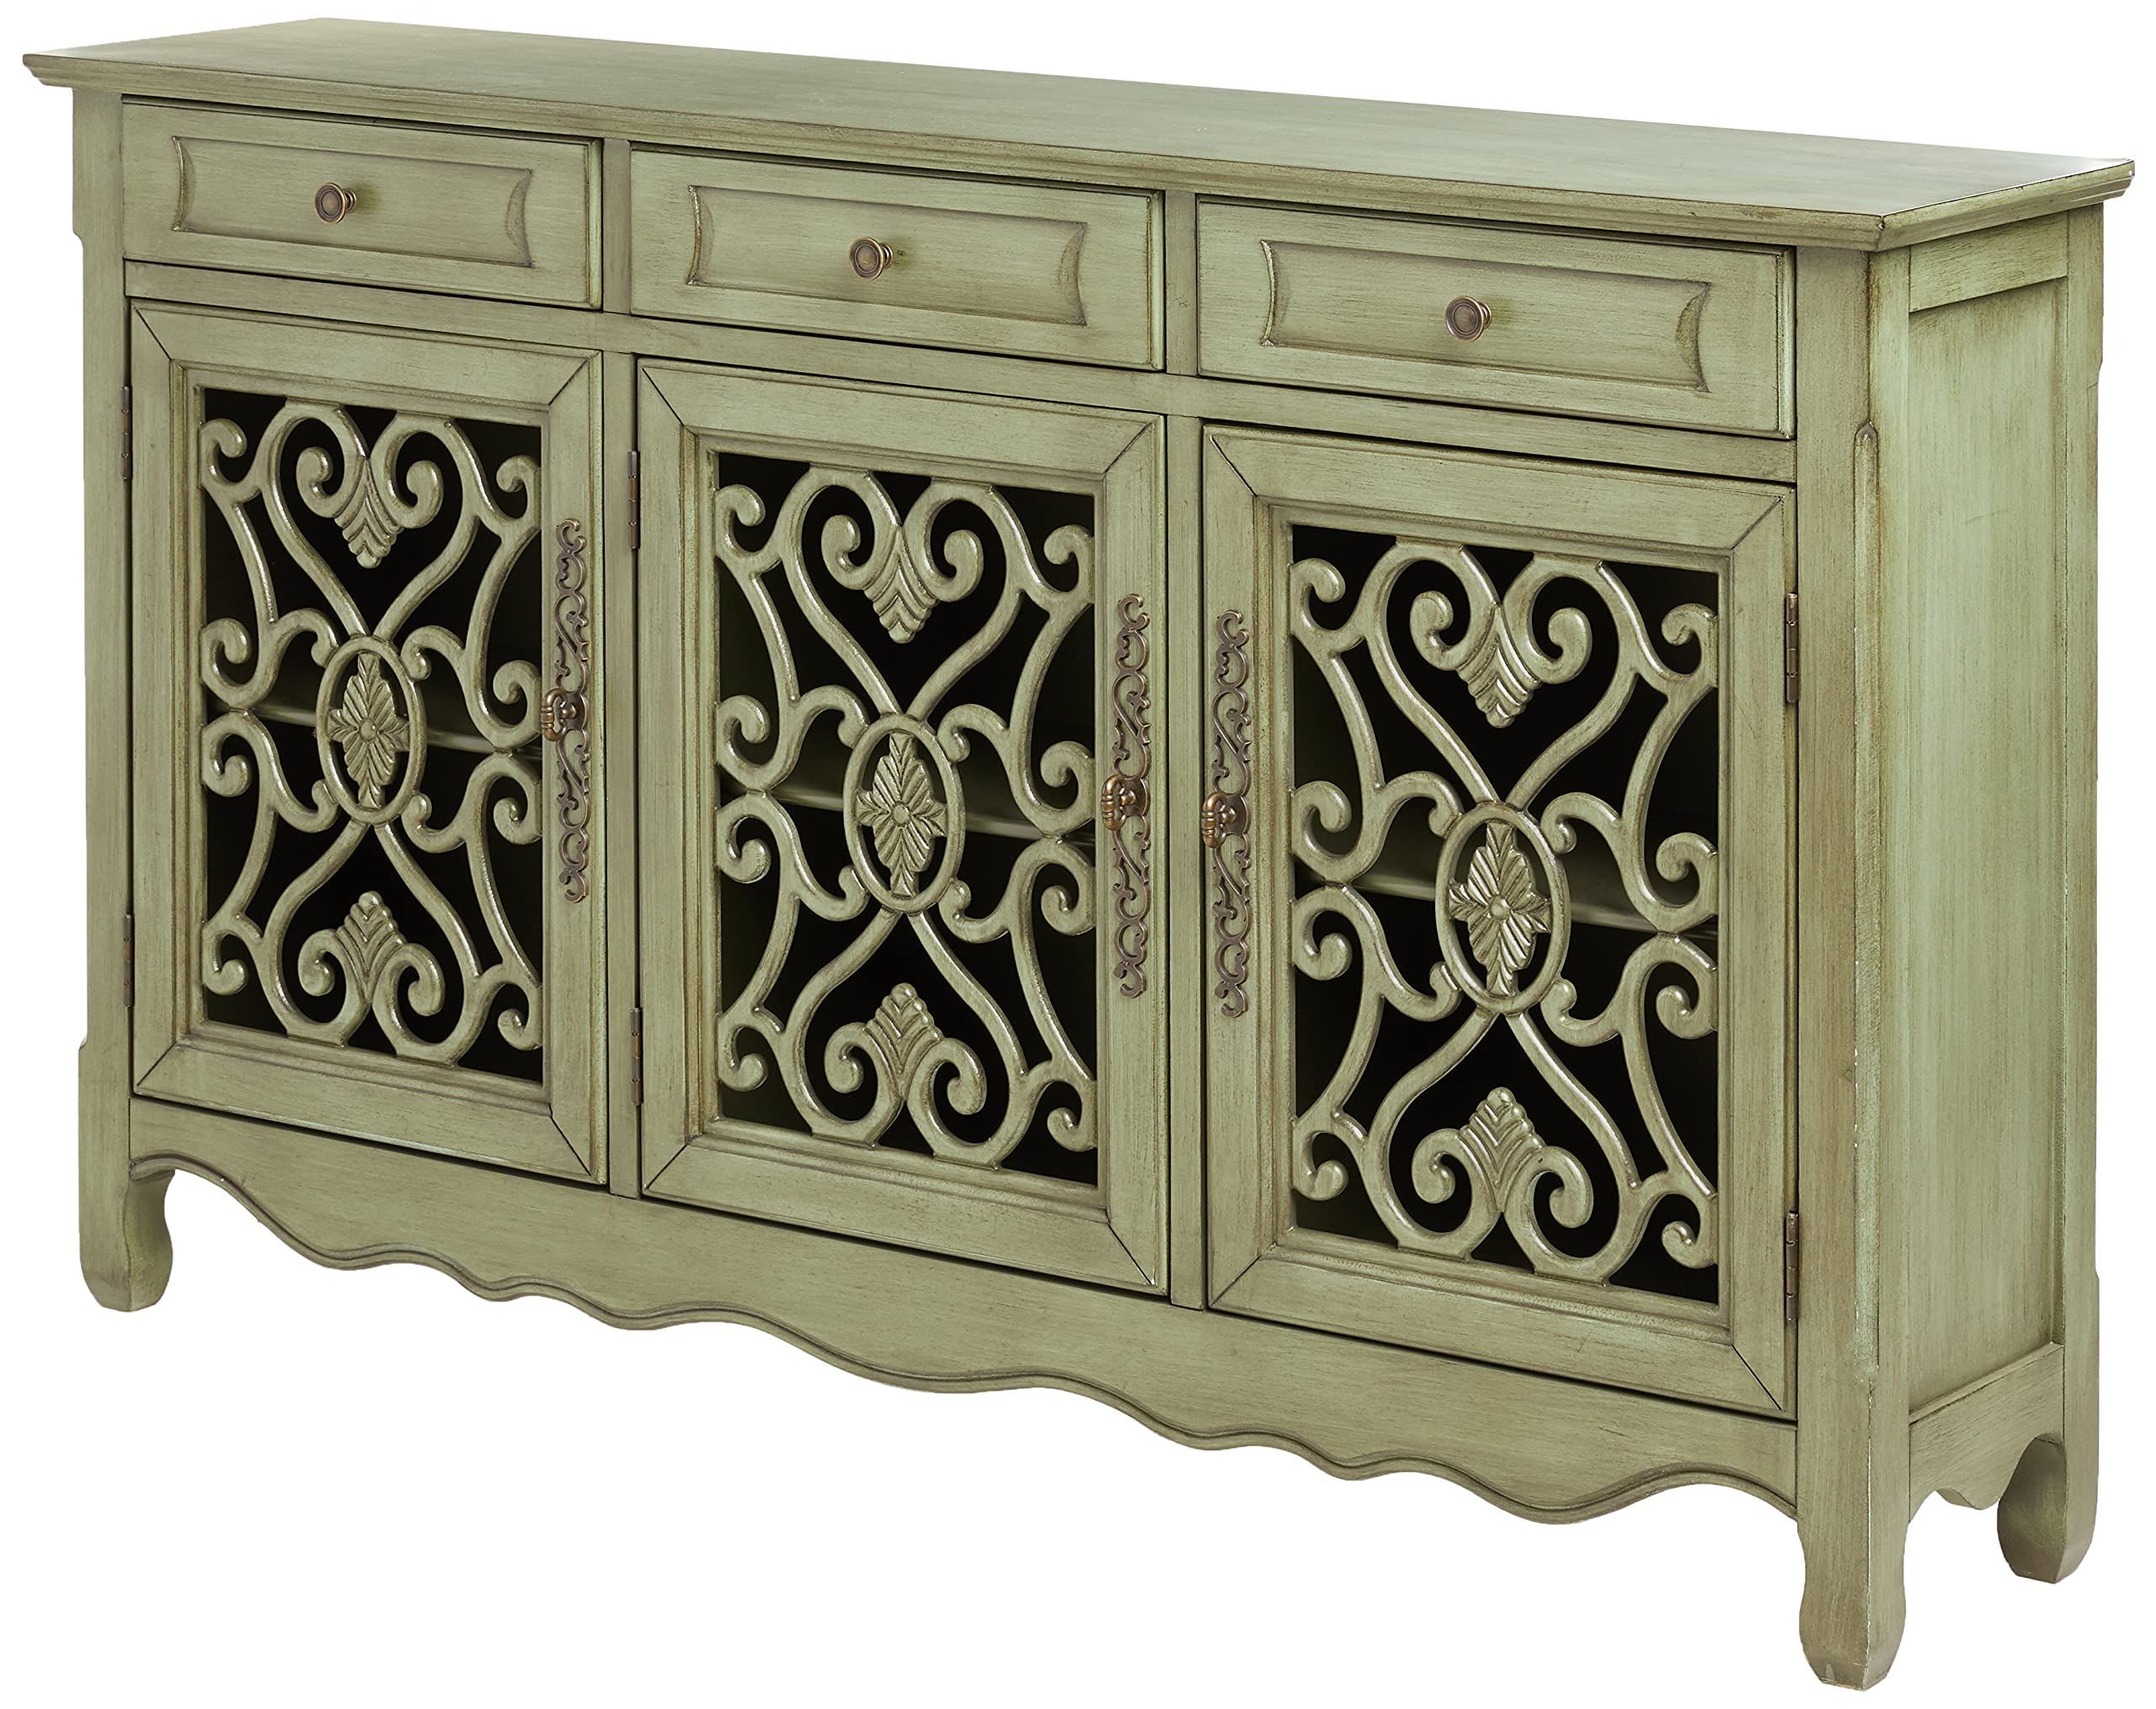 Most Popular 3 Door Accent Cabinet Sideboards With Amazon: Coaster Home Furnishings Madeline 3 Door Accent Cabinet Antique  Green : Home & Kitchen (Photo 10 of 10)